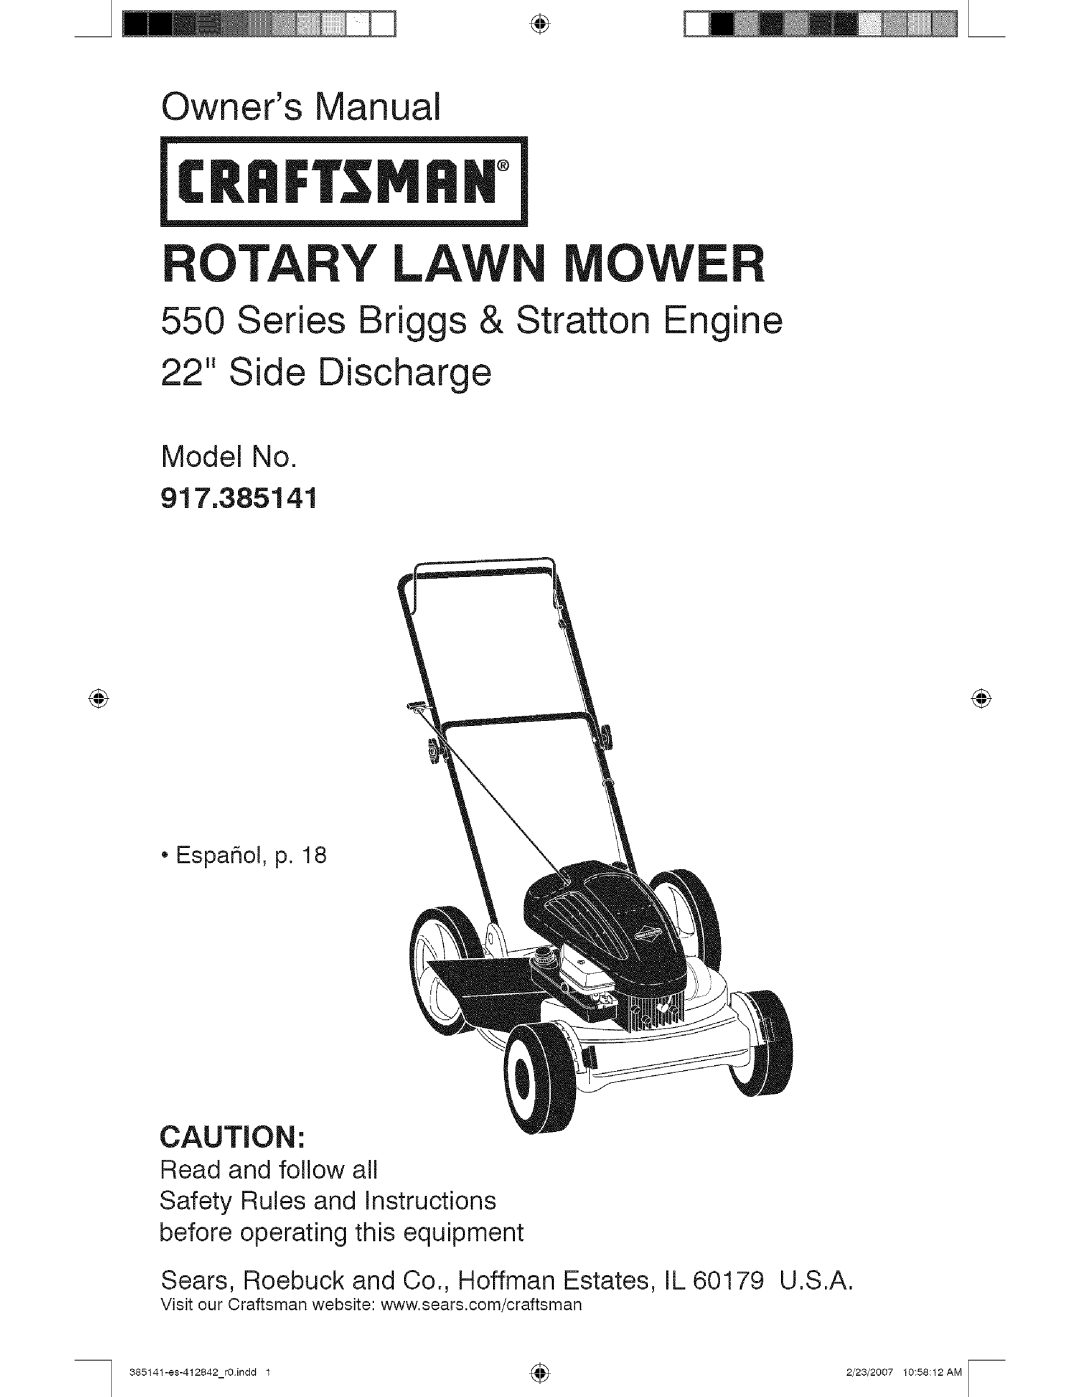 Craftsman manual Model No 917,385141, Rotary, Owners Manual, Series Briggs & Stratton Engine, Side Discharge 